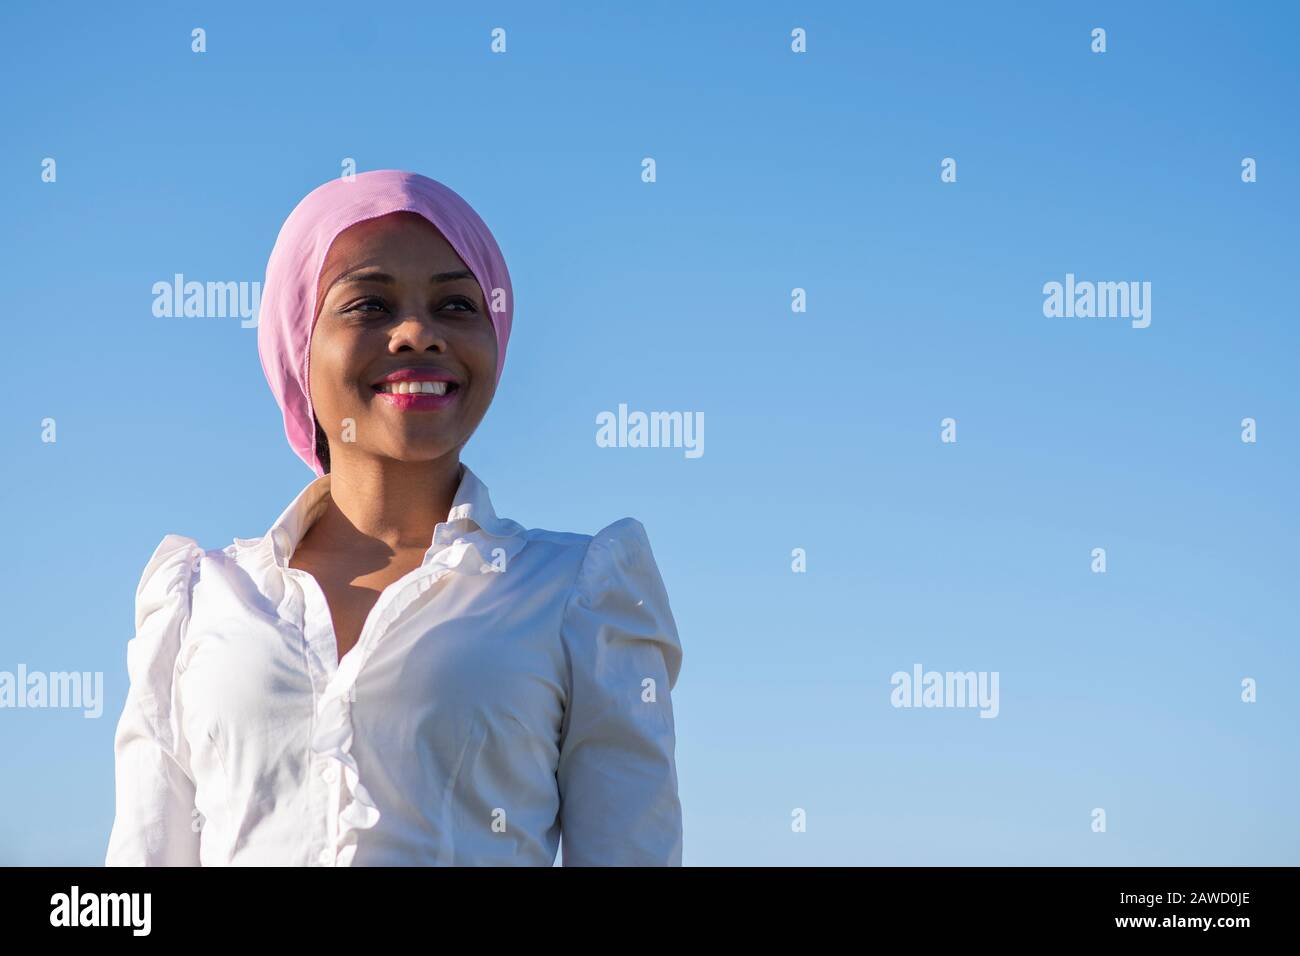 dark-skinned woman with a pink headscarf smiling Stock Photo